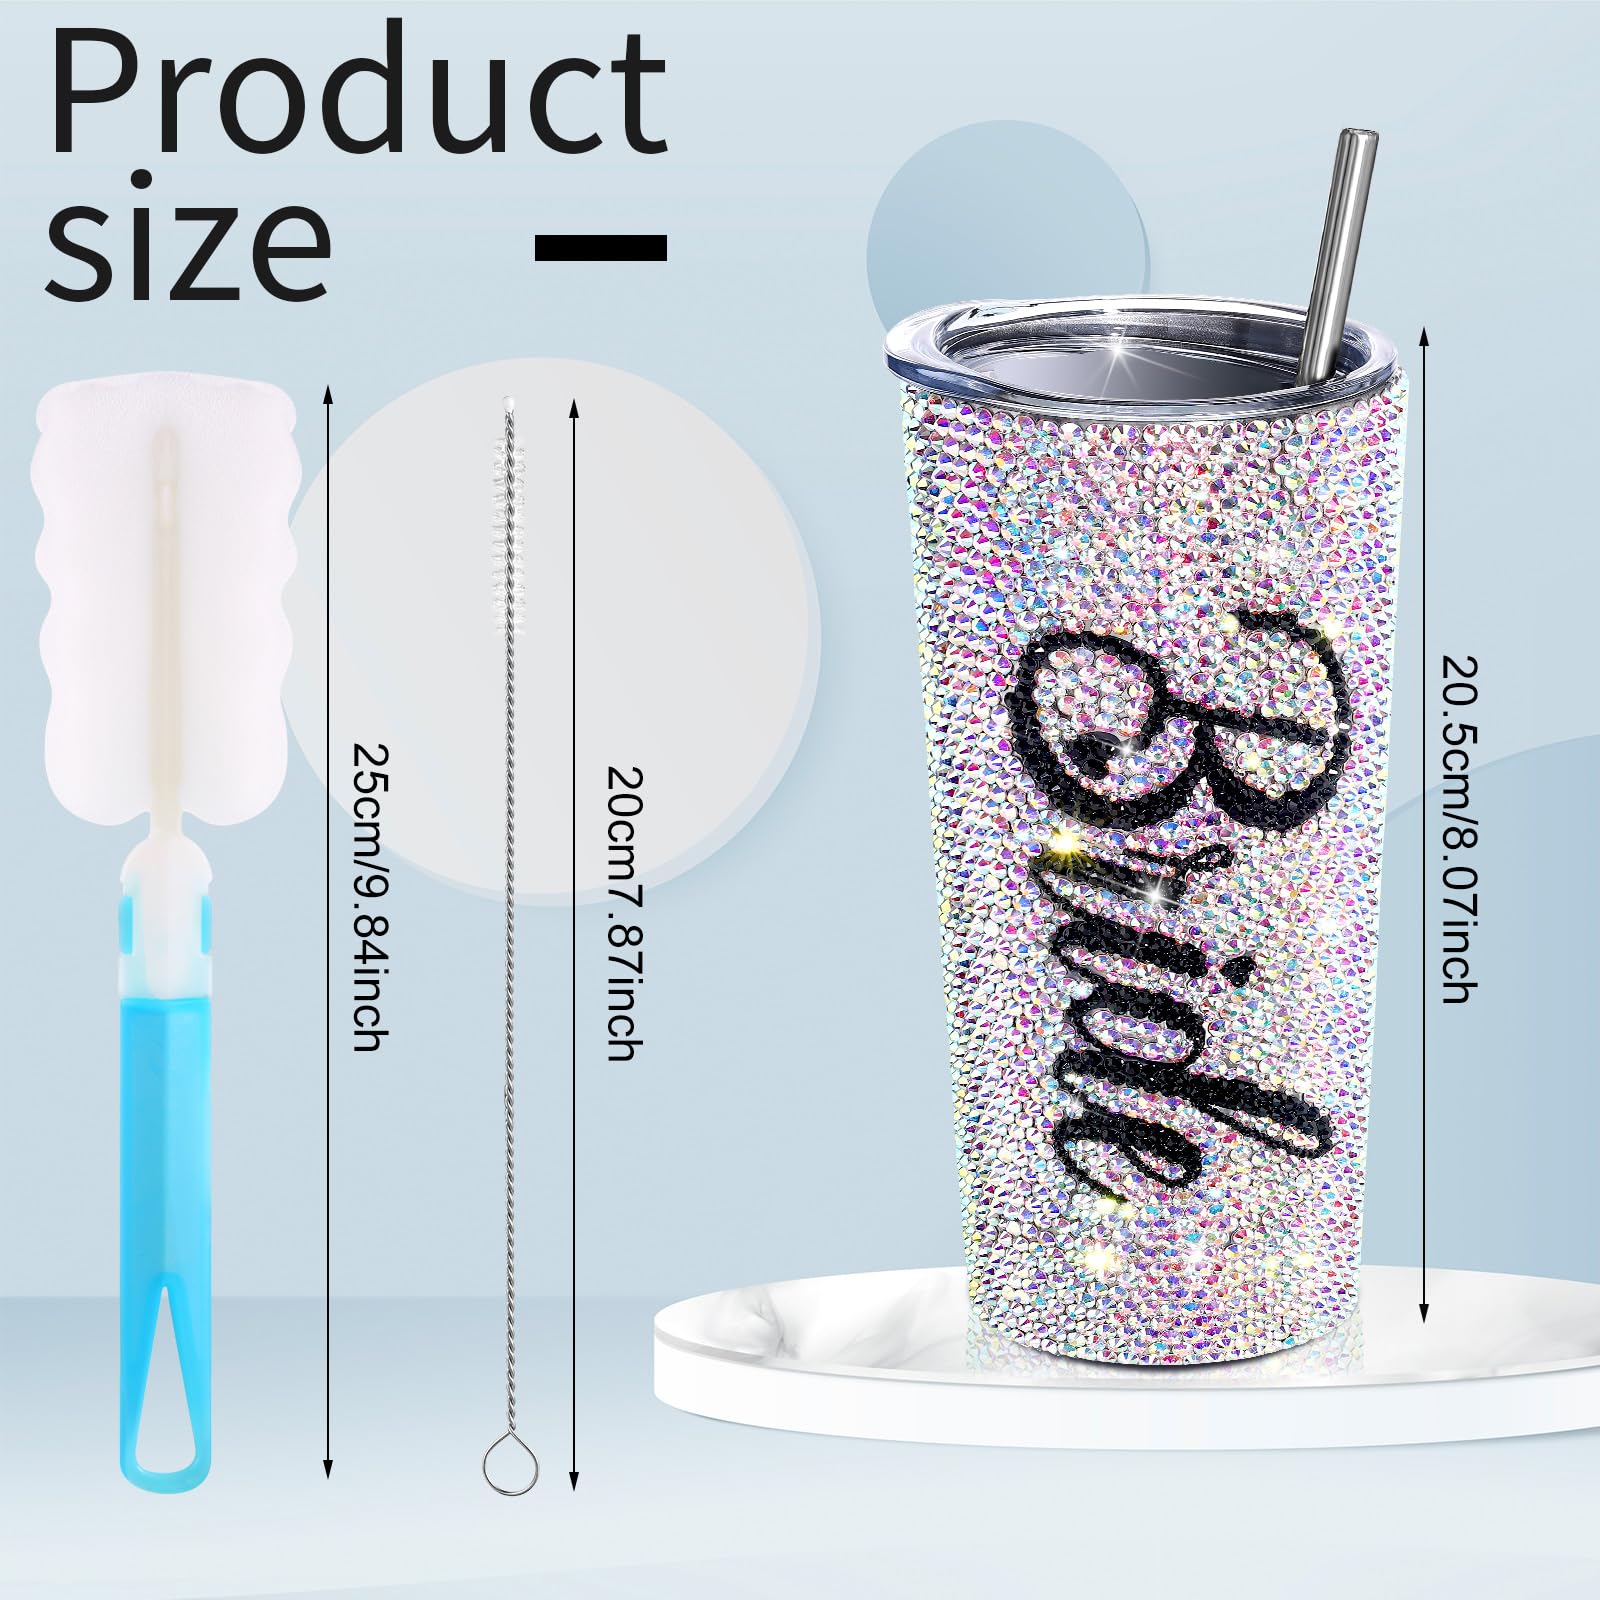 Vesici Bling Diamond Bride Tumbler 20 oz Bridal Insulated Tumbler with straw and lid Bridal Shower Gifts, Wedding Gifts For Bride Engagement Party Bachelorette Party Maid of Honor Tumbler (Stylish)